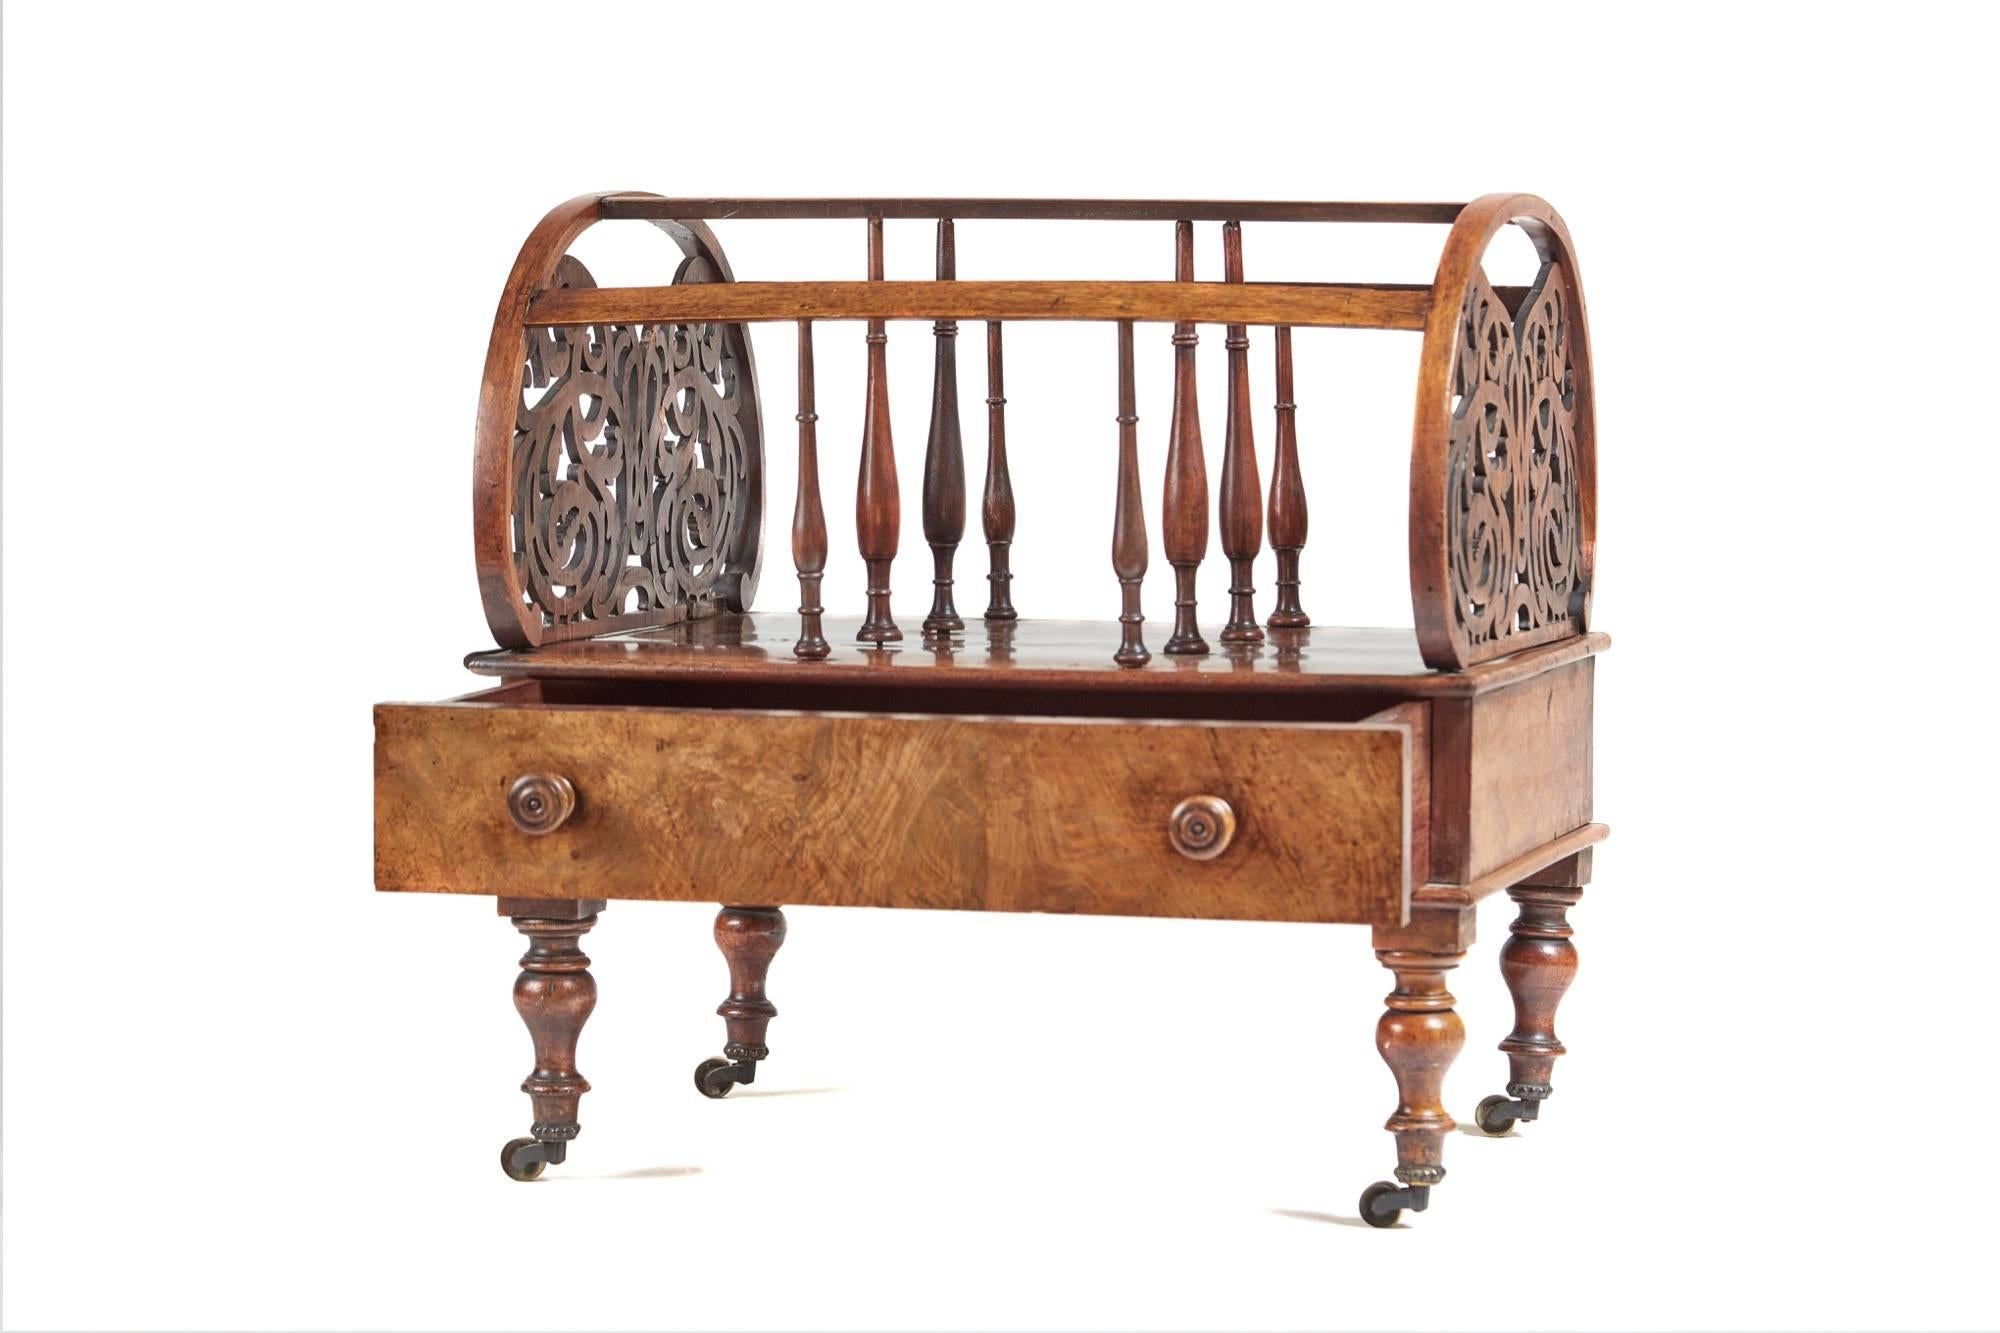 A large Victorian freestanding burr walnut canterbury, oval shaped ends having pierced fretwork with three divisions supported by baluster turned spindles, the base having one long drawer standing on turned solid walnut legs original